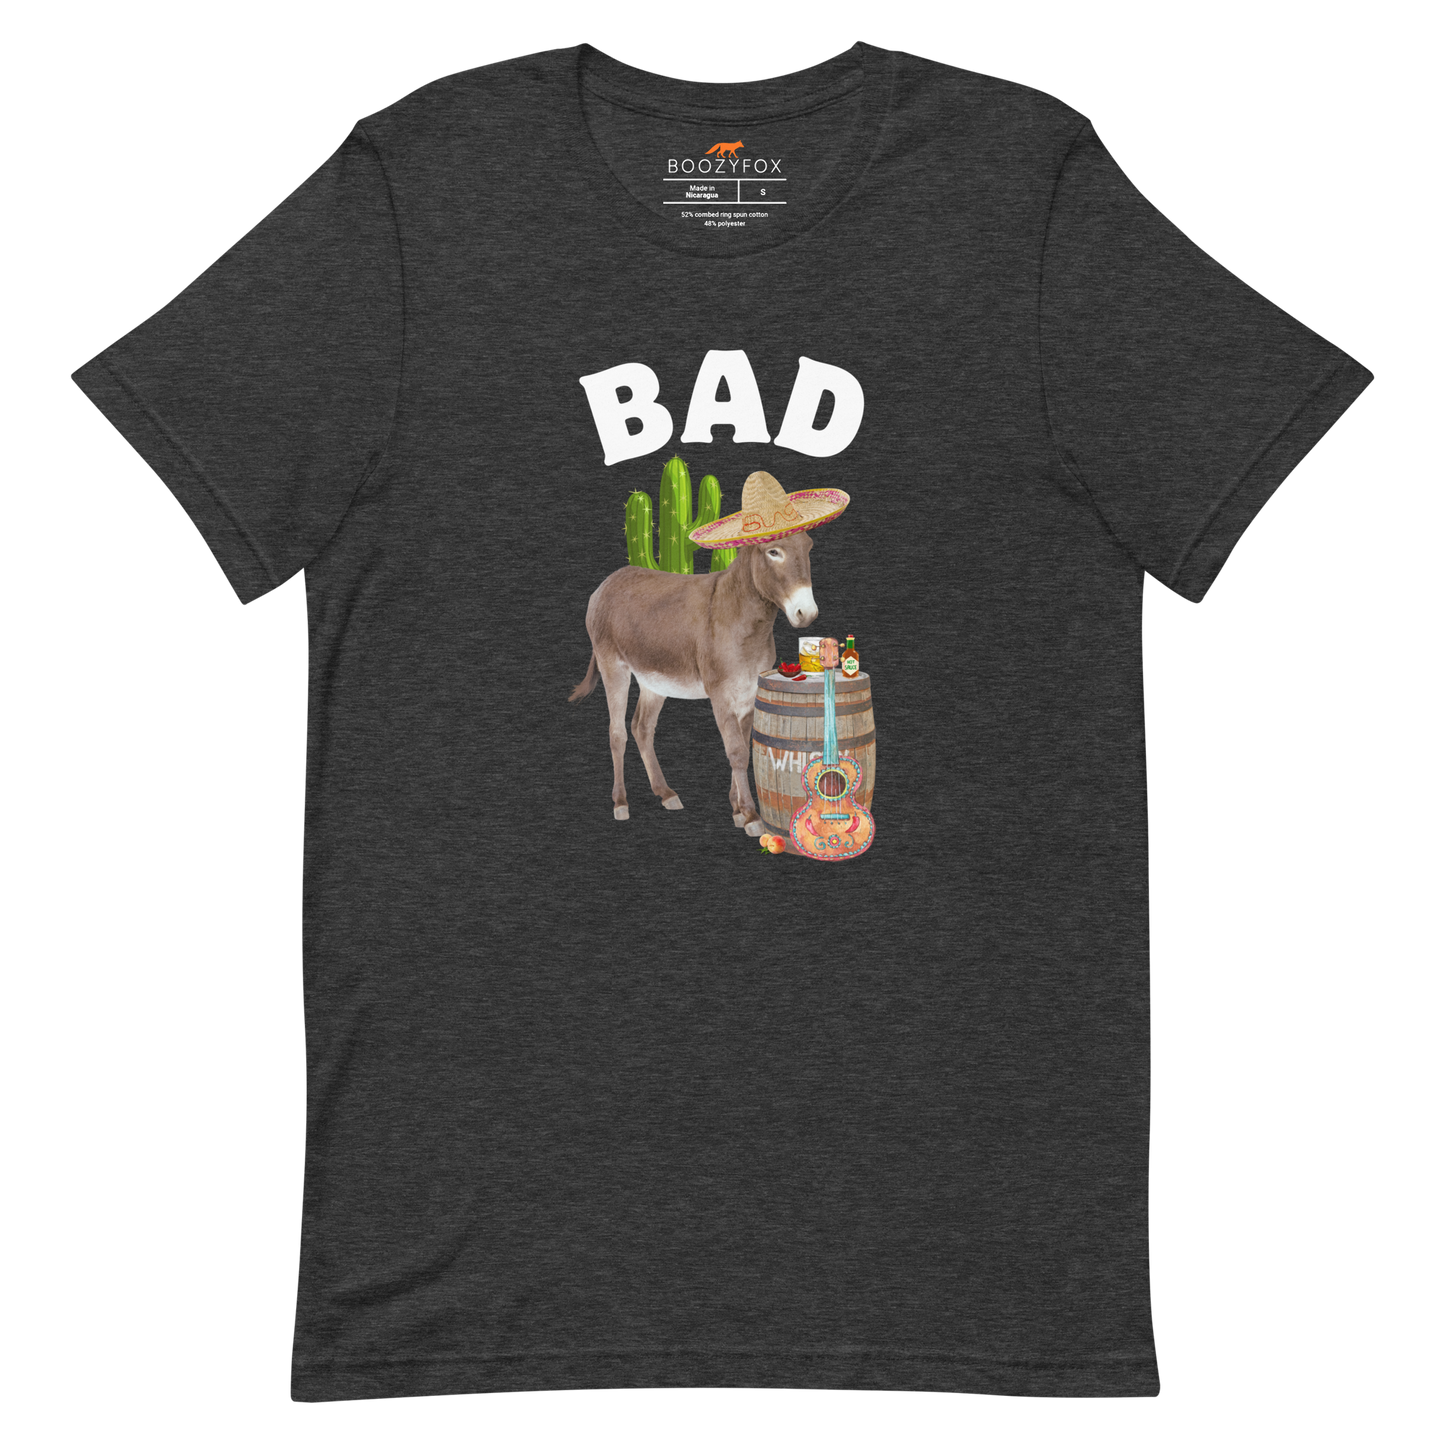 Dark Grey Heather Premium Donkey Tee featuring a Funny Bad Ass Donkey graphic on the chest - Funny Graphic Bad Ass Donkey Tees - Boozy Fox